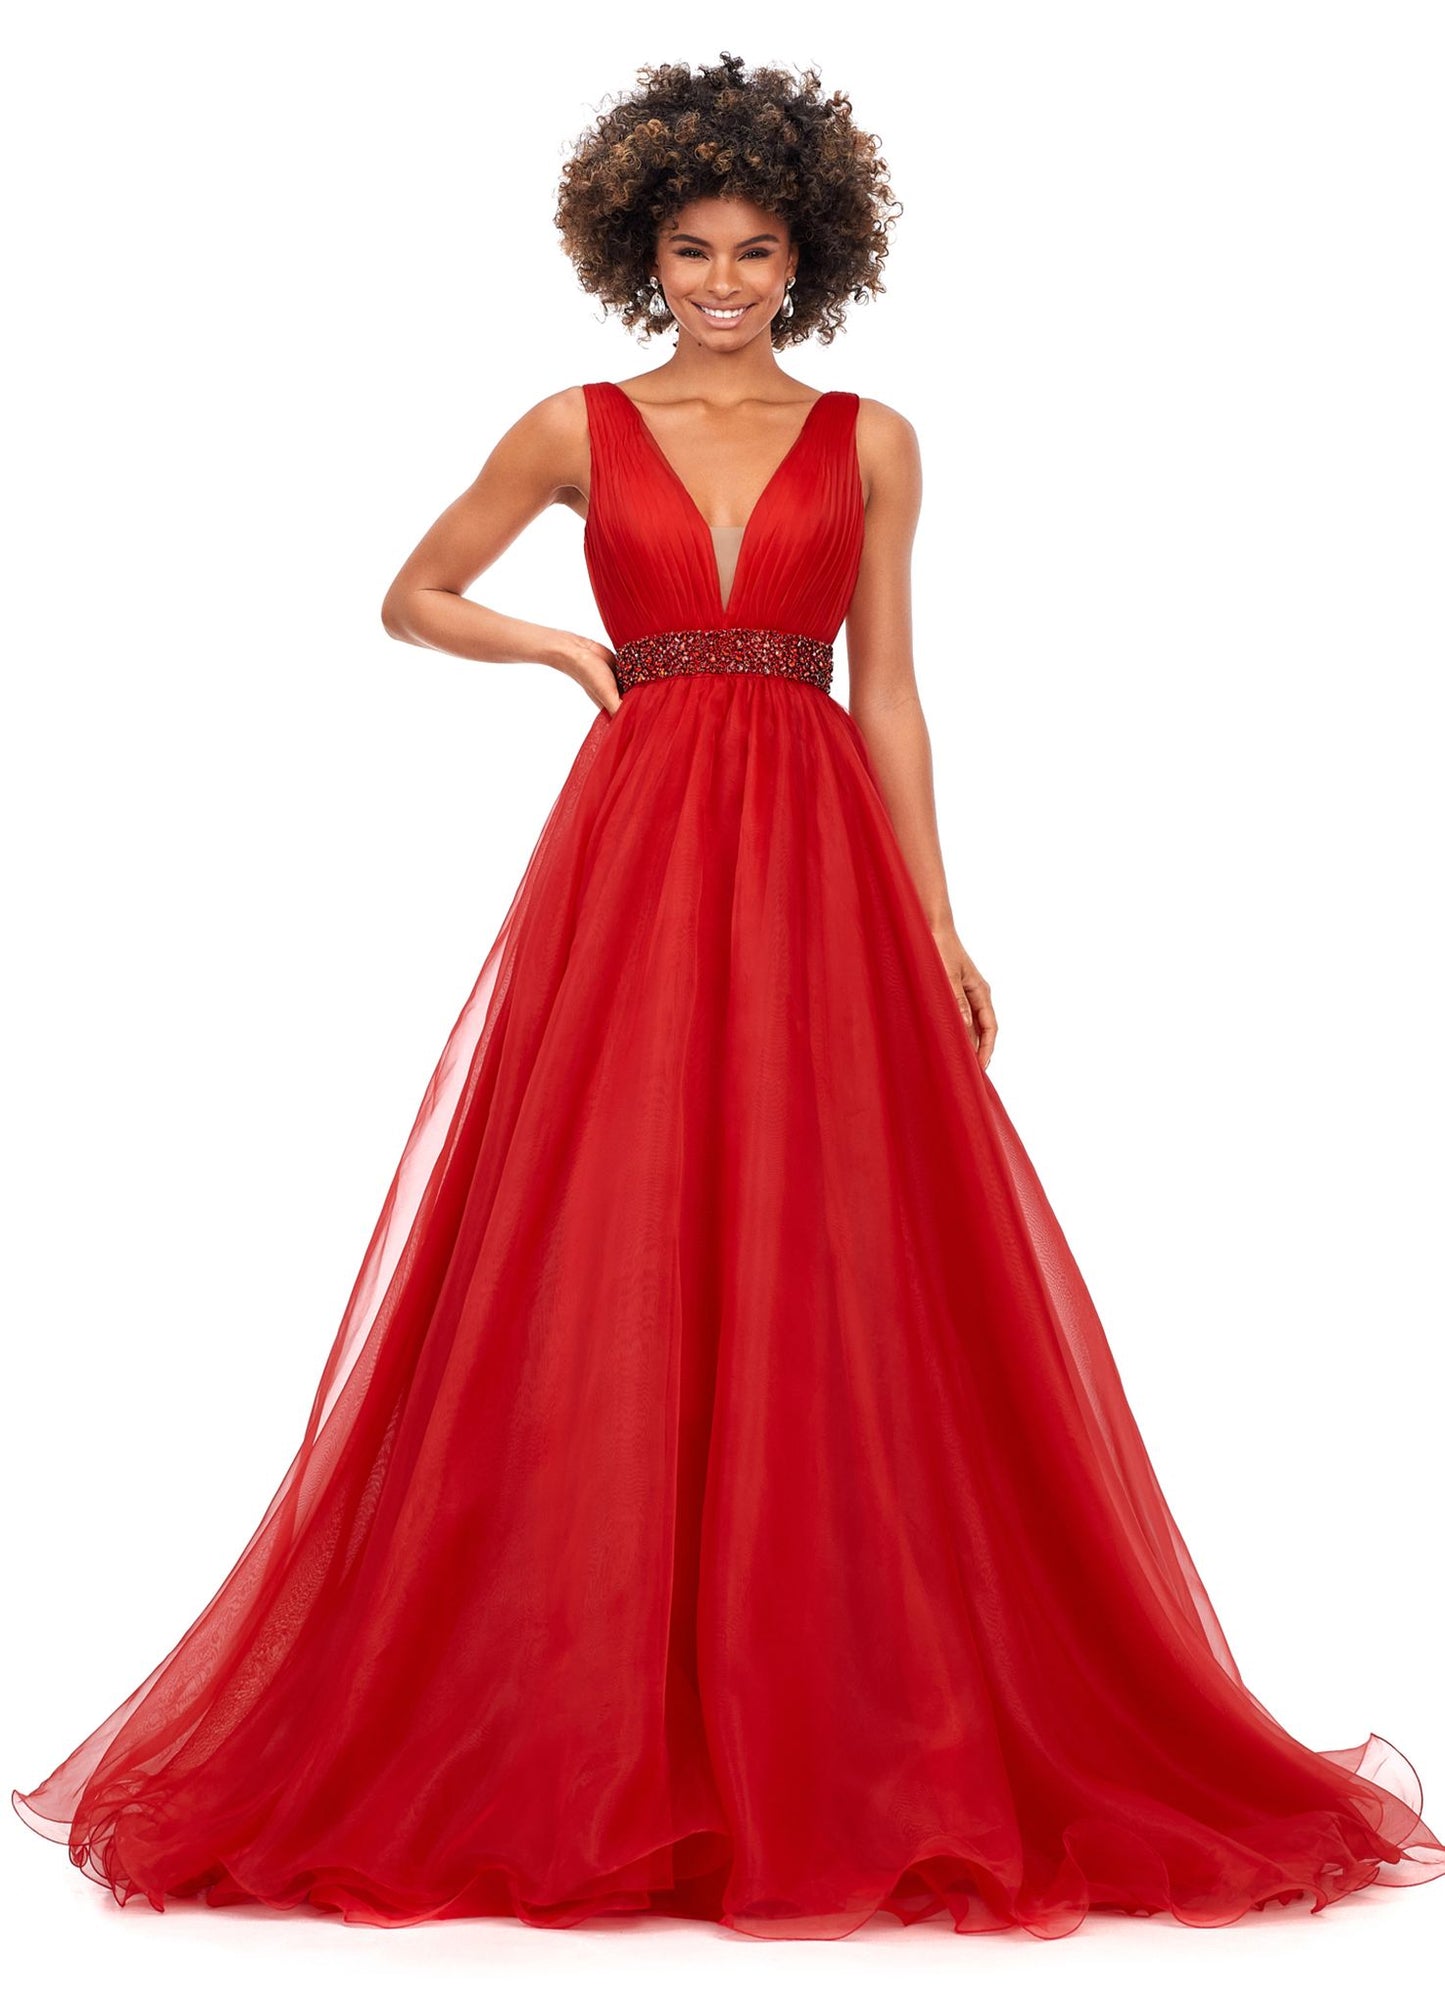 Ashley Lauren 11305 Stand out in this ball gown complete with a crystal encrusted waistband. The bustier has a deep v-neckline and a v-back. The gown is finished with a long, lavish train. V-Neckline V-Back Crystal Belt Organza COLORS: Orange, Royal, Red